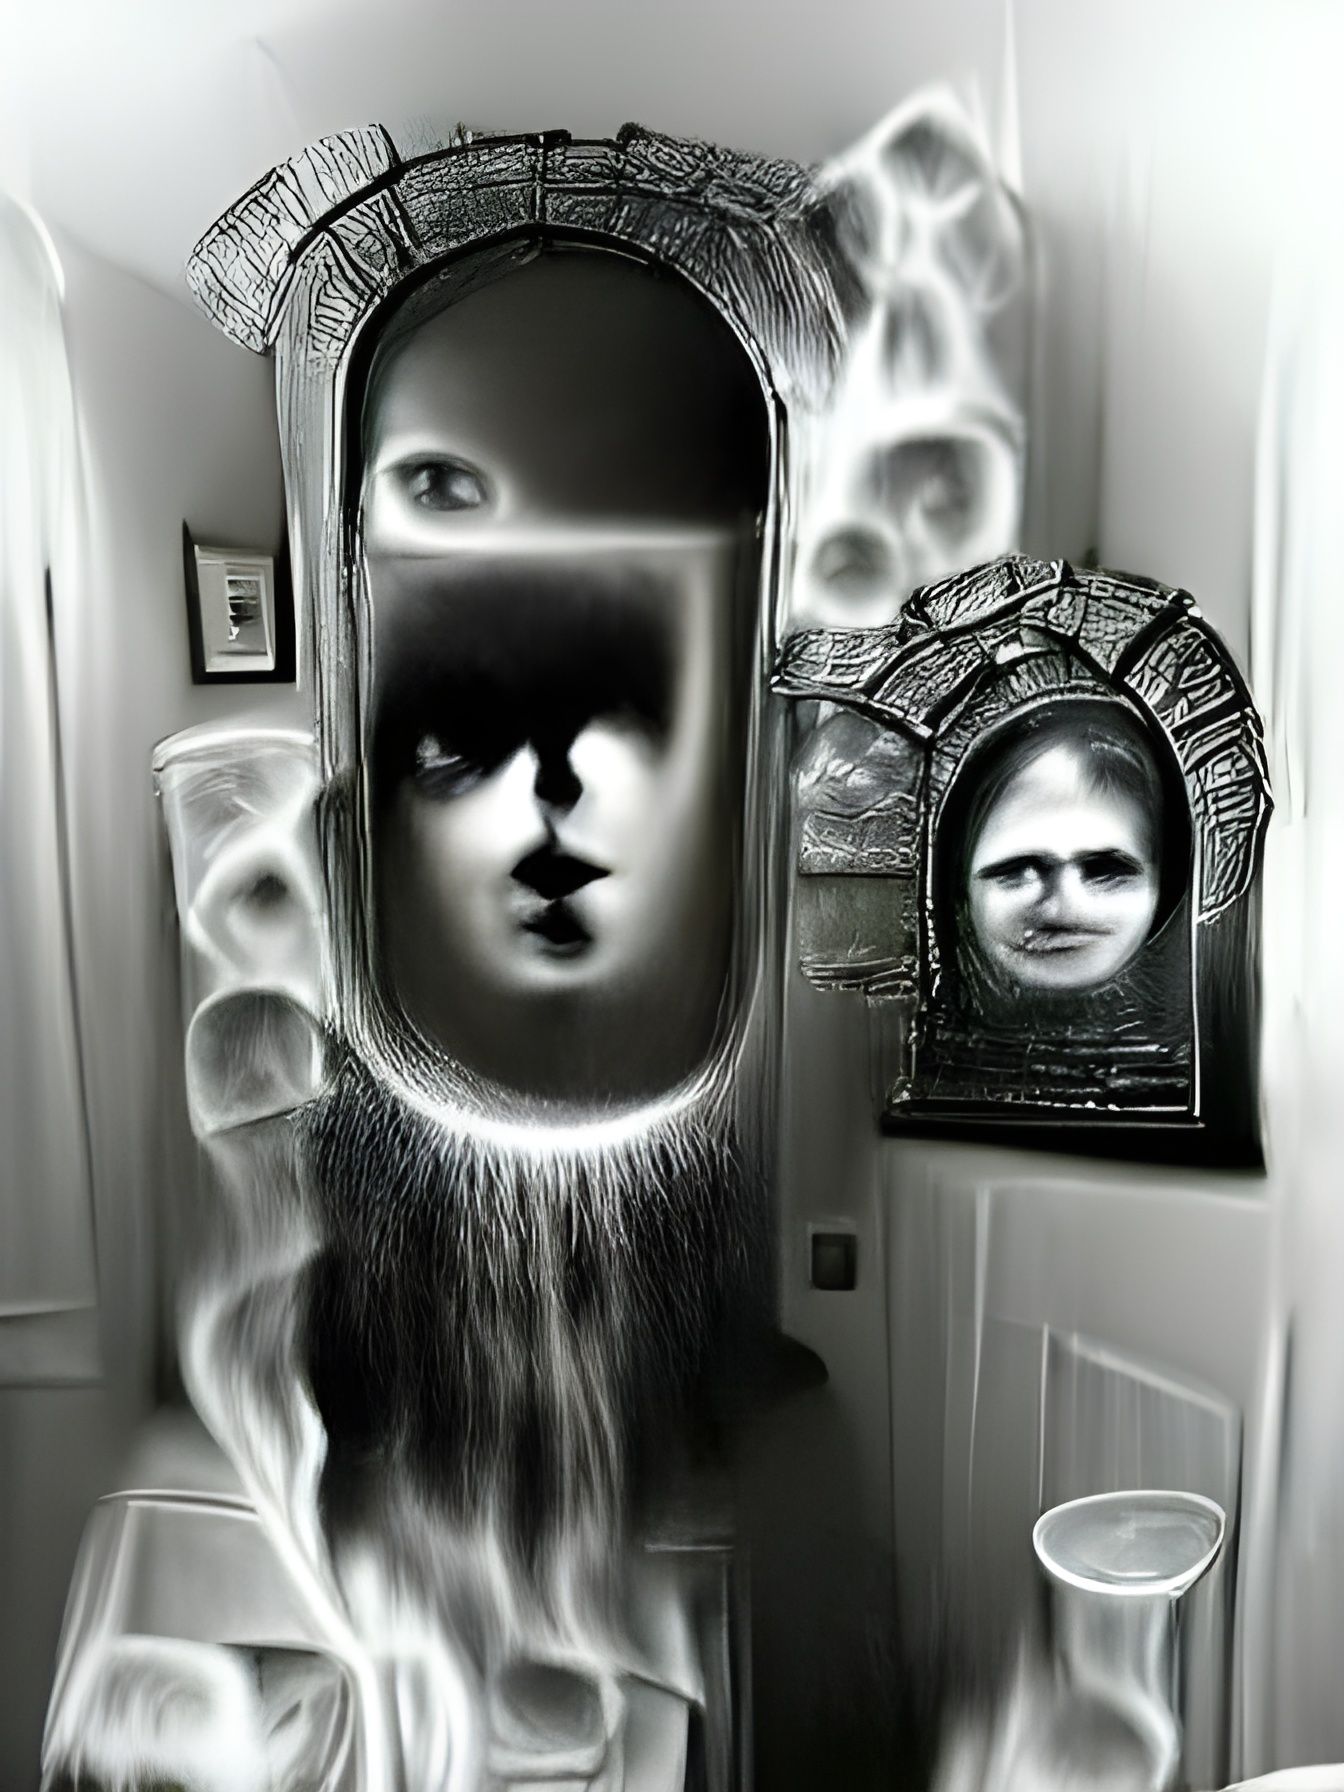 Face in a mirror portal another dimension creepy strange beautiful